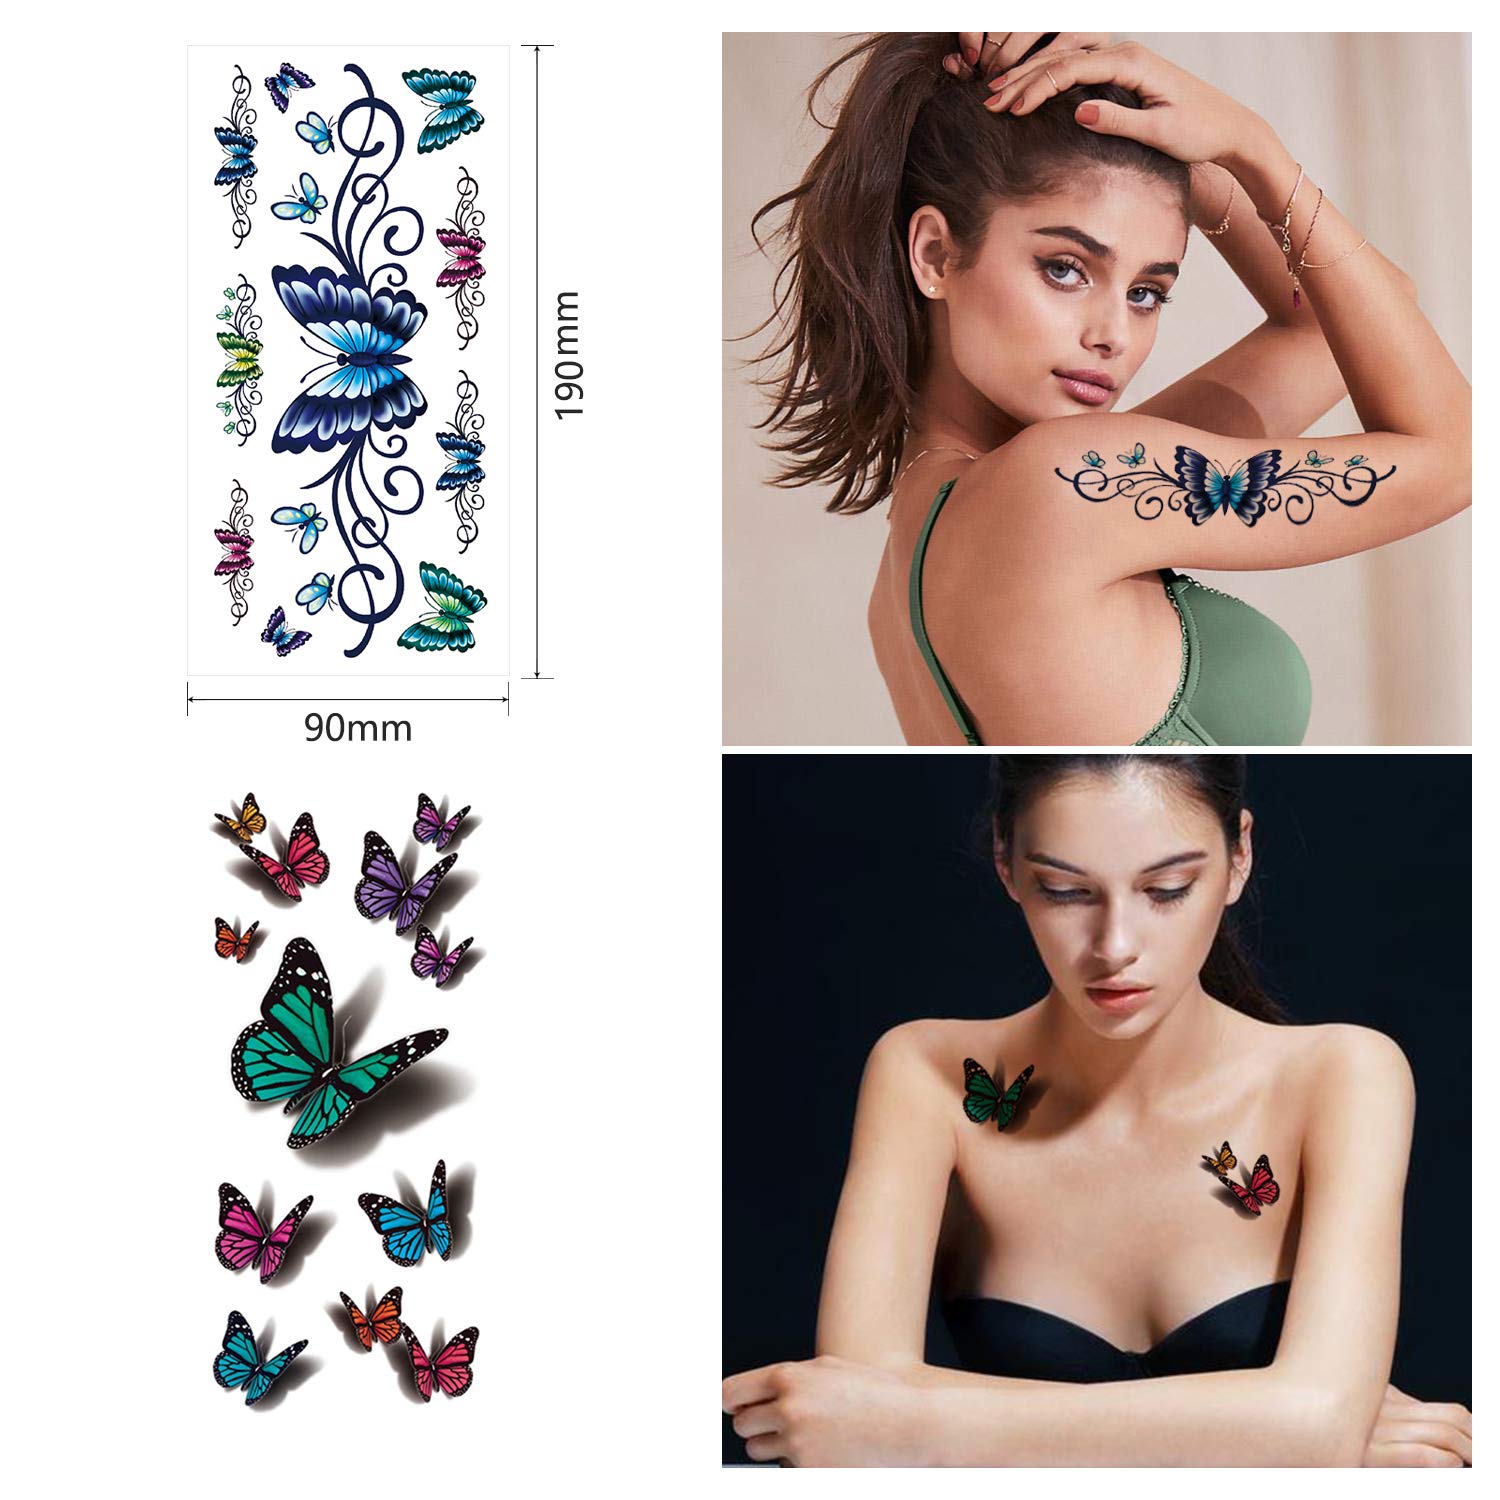 42 Sheets Flowers Temporary Tattoos Stickers, Roses, Butterflies and Multi-Colored Mixed Style Body Art Temporary Tattoos for Women, Girls or Kids